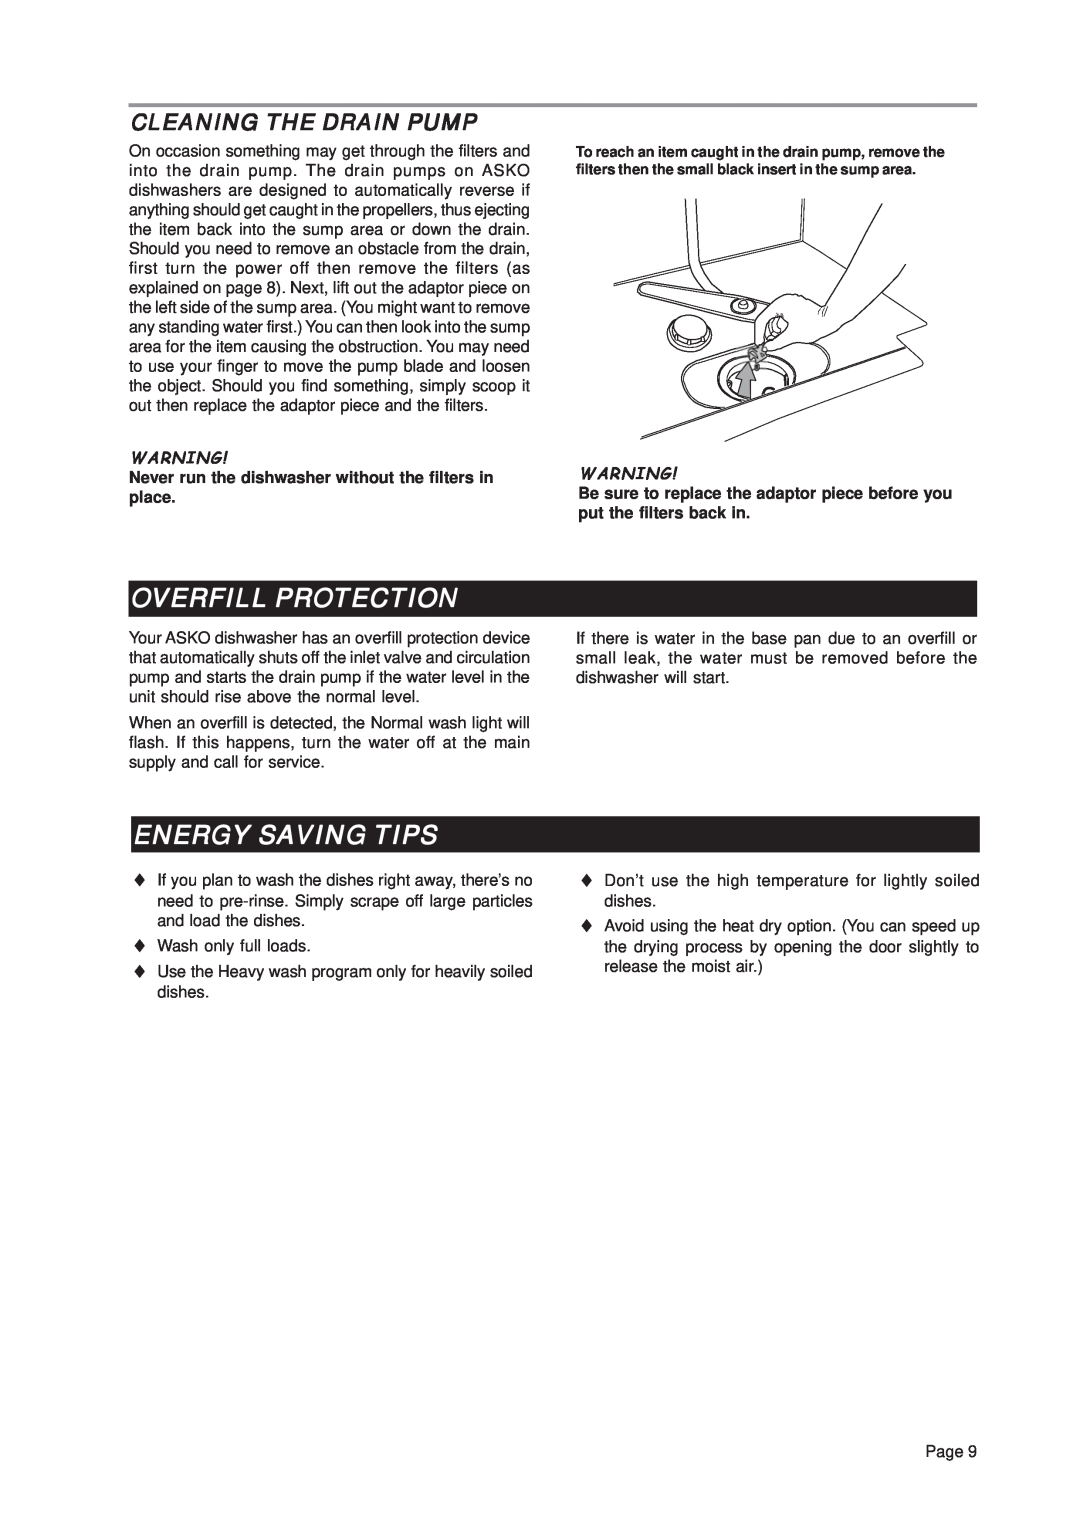 Asko D3122 important safety instructions Overfill Protection, Energy Saving Tips, Cleaning The Drain Pump 